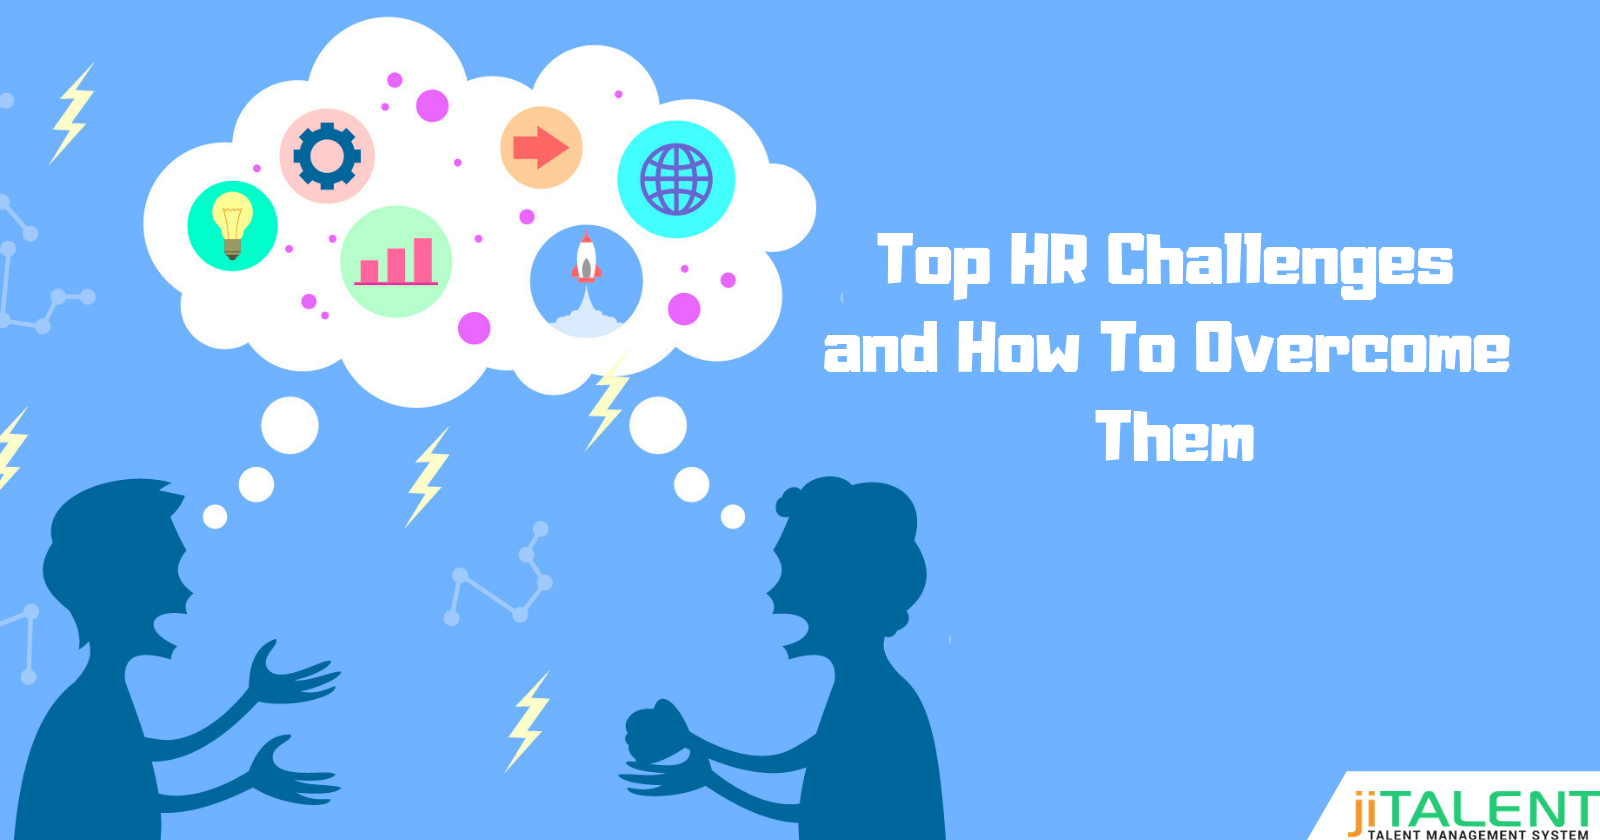 How To Overcome The Most Common HR Challenges